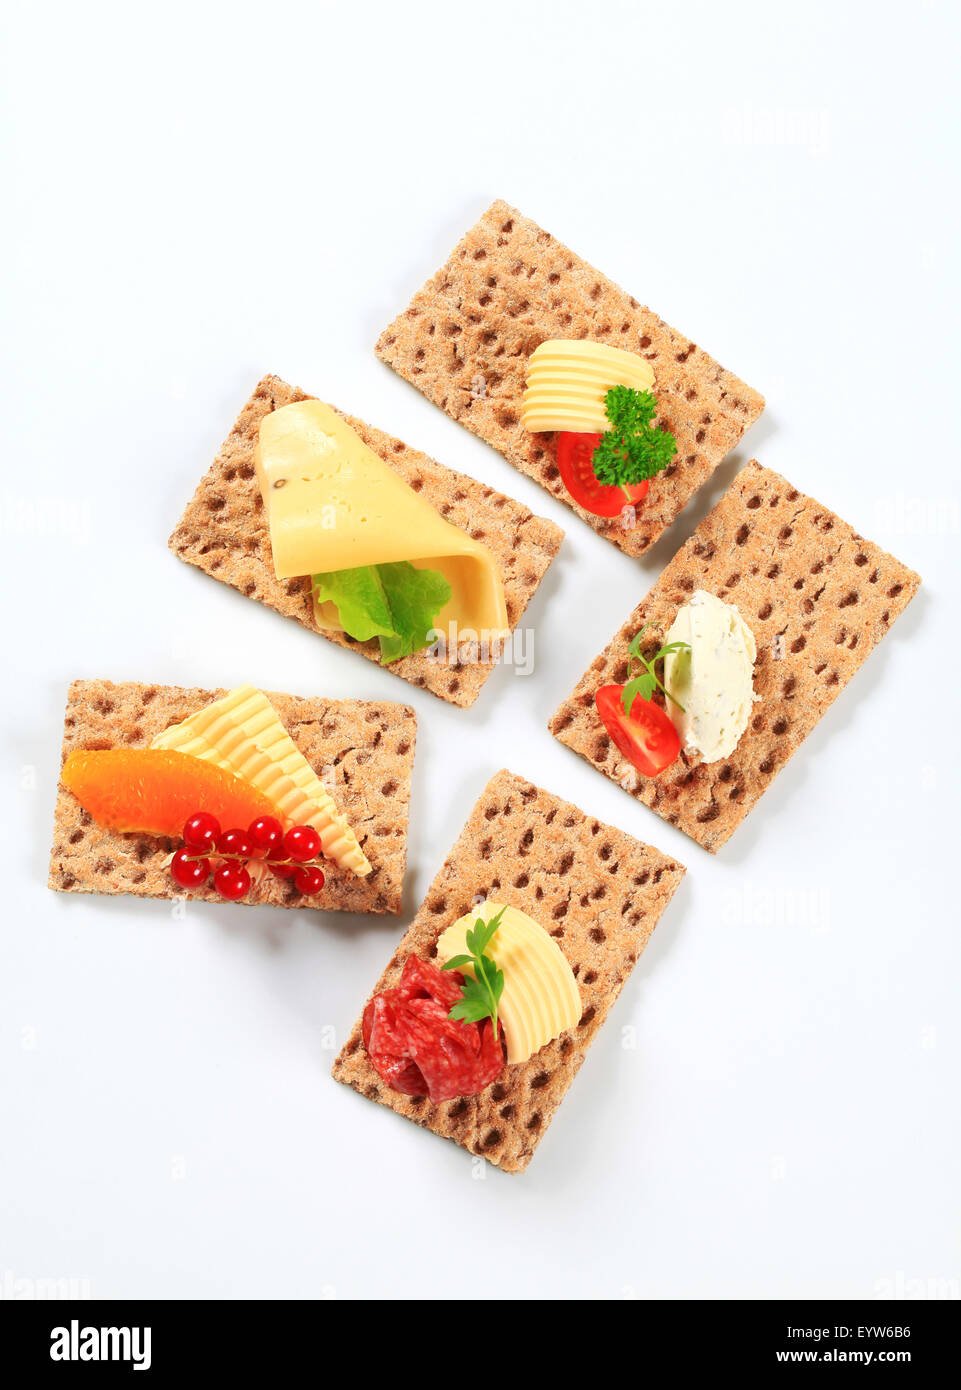 Whole grain crisp bread slices with various toppings Stock Photo